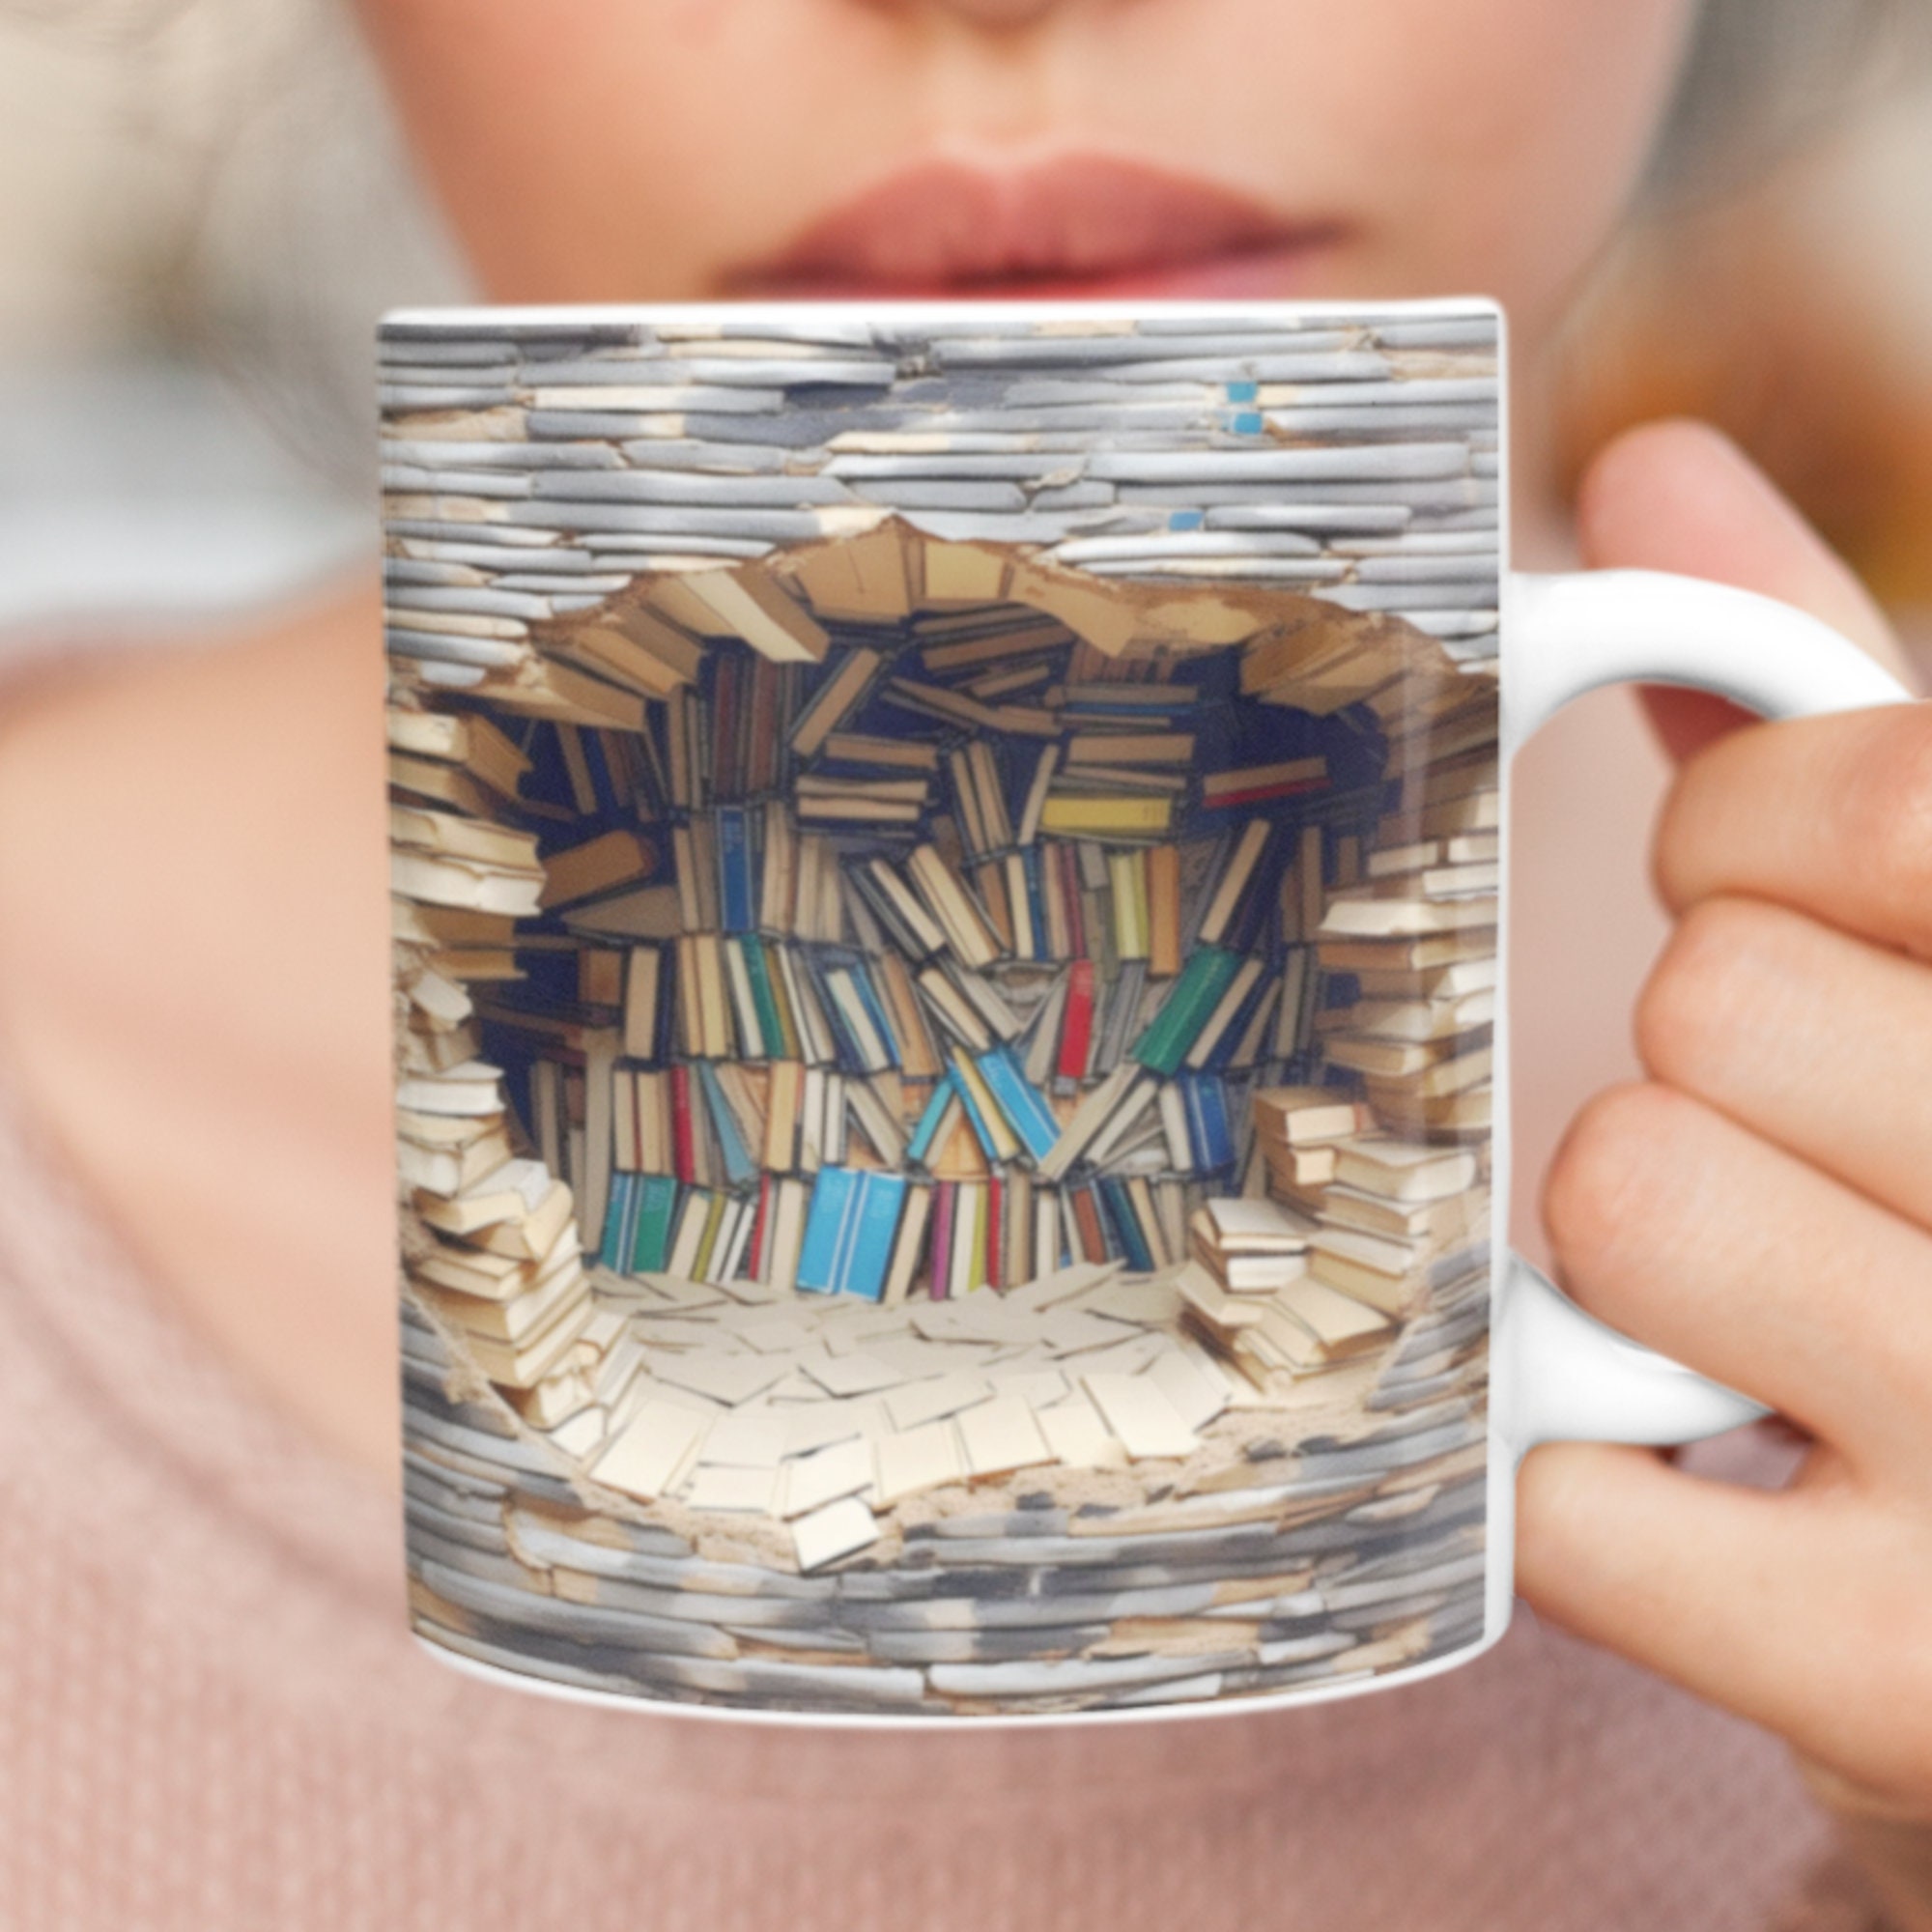 Book Lover Cup Library Coffee Cup Cute Book Reader Mug 